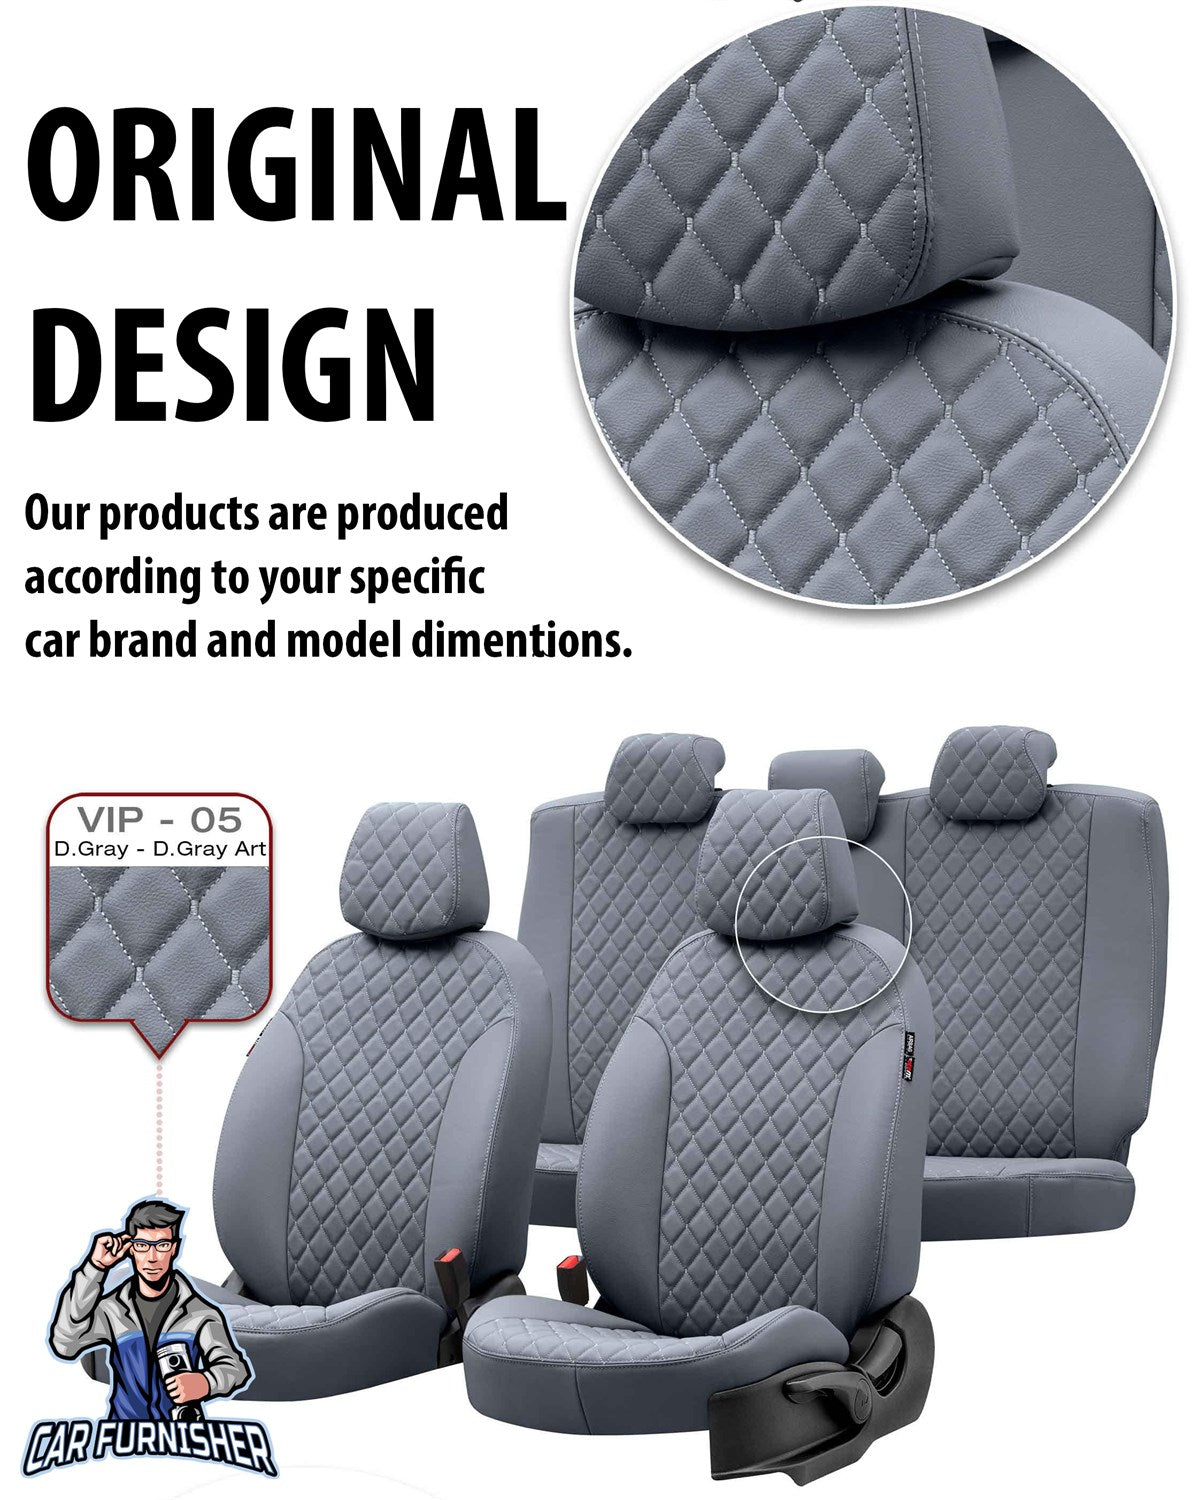 Ssangyong Korando Seat Covers Madrid Leather Design Smoked Leather